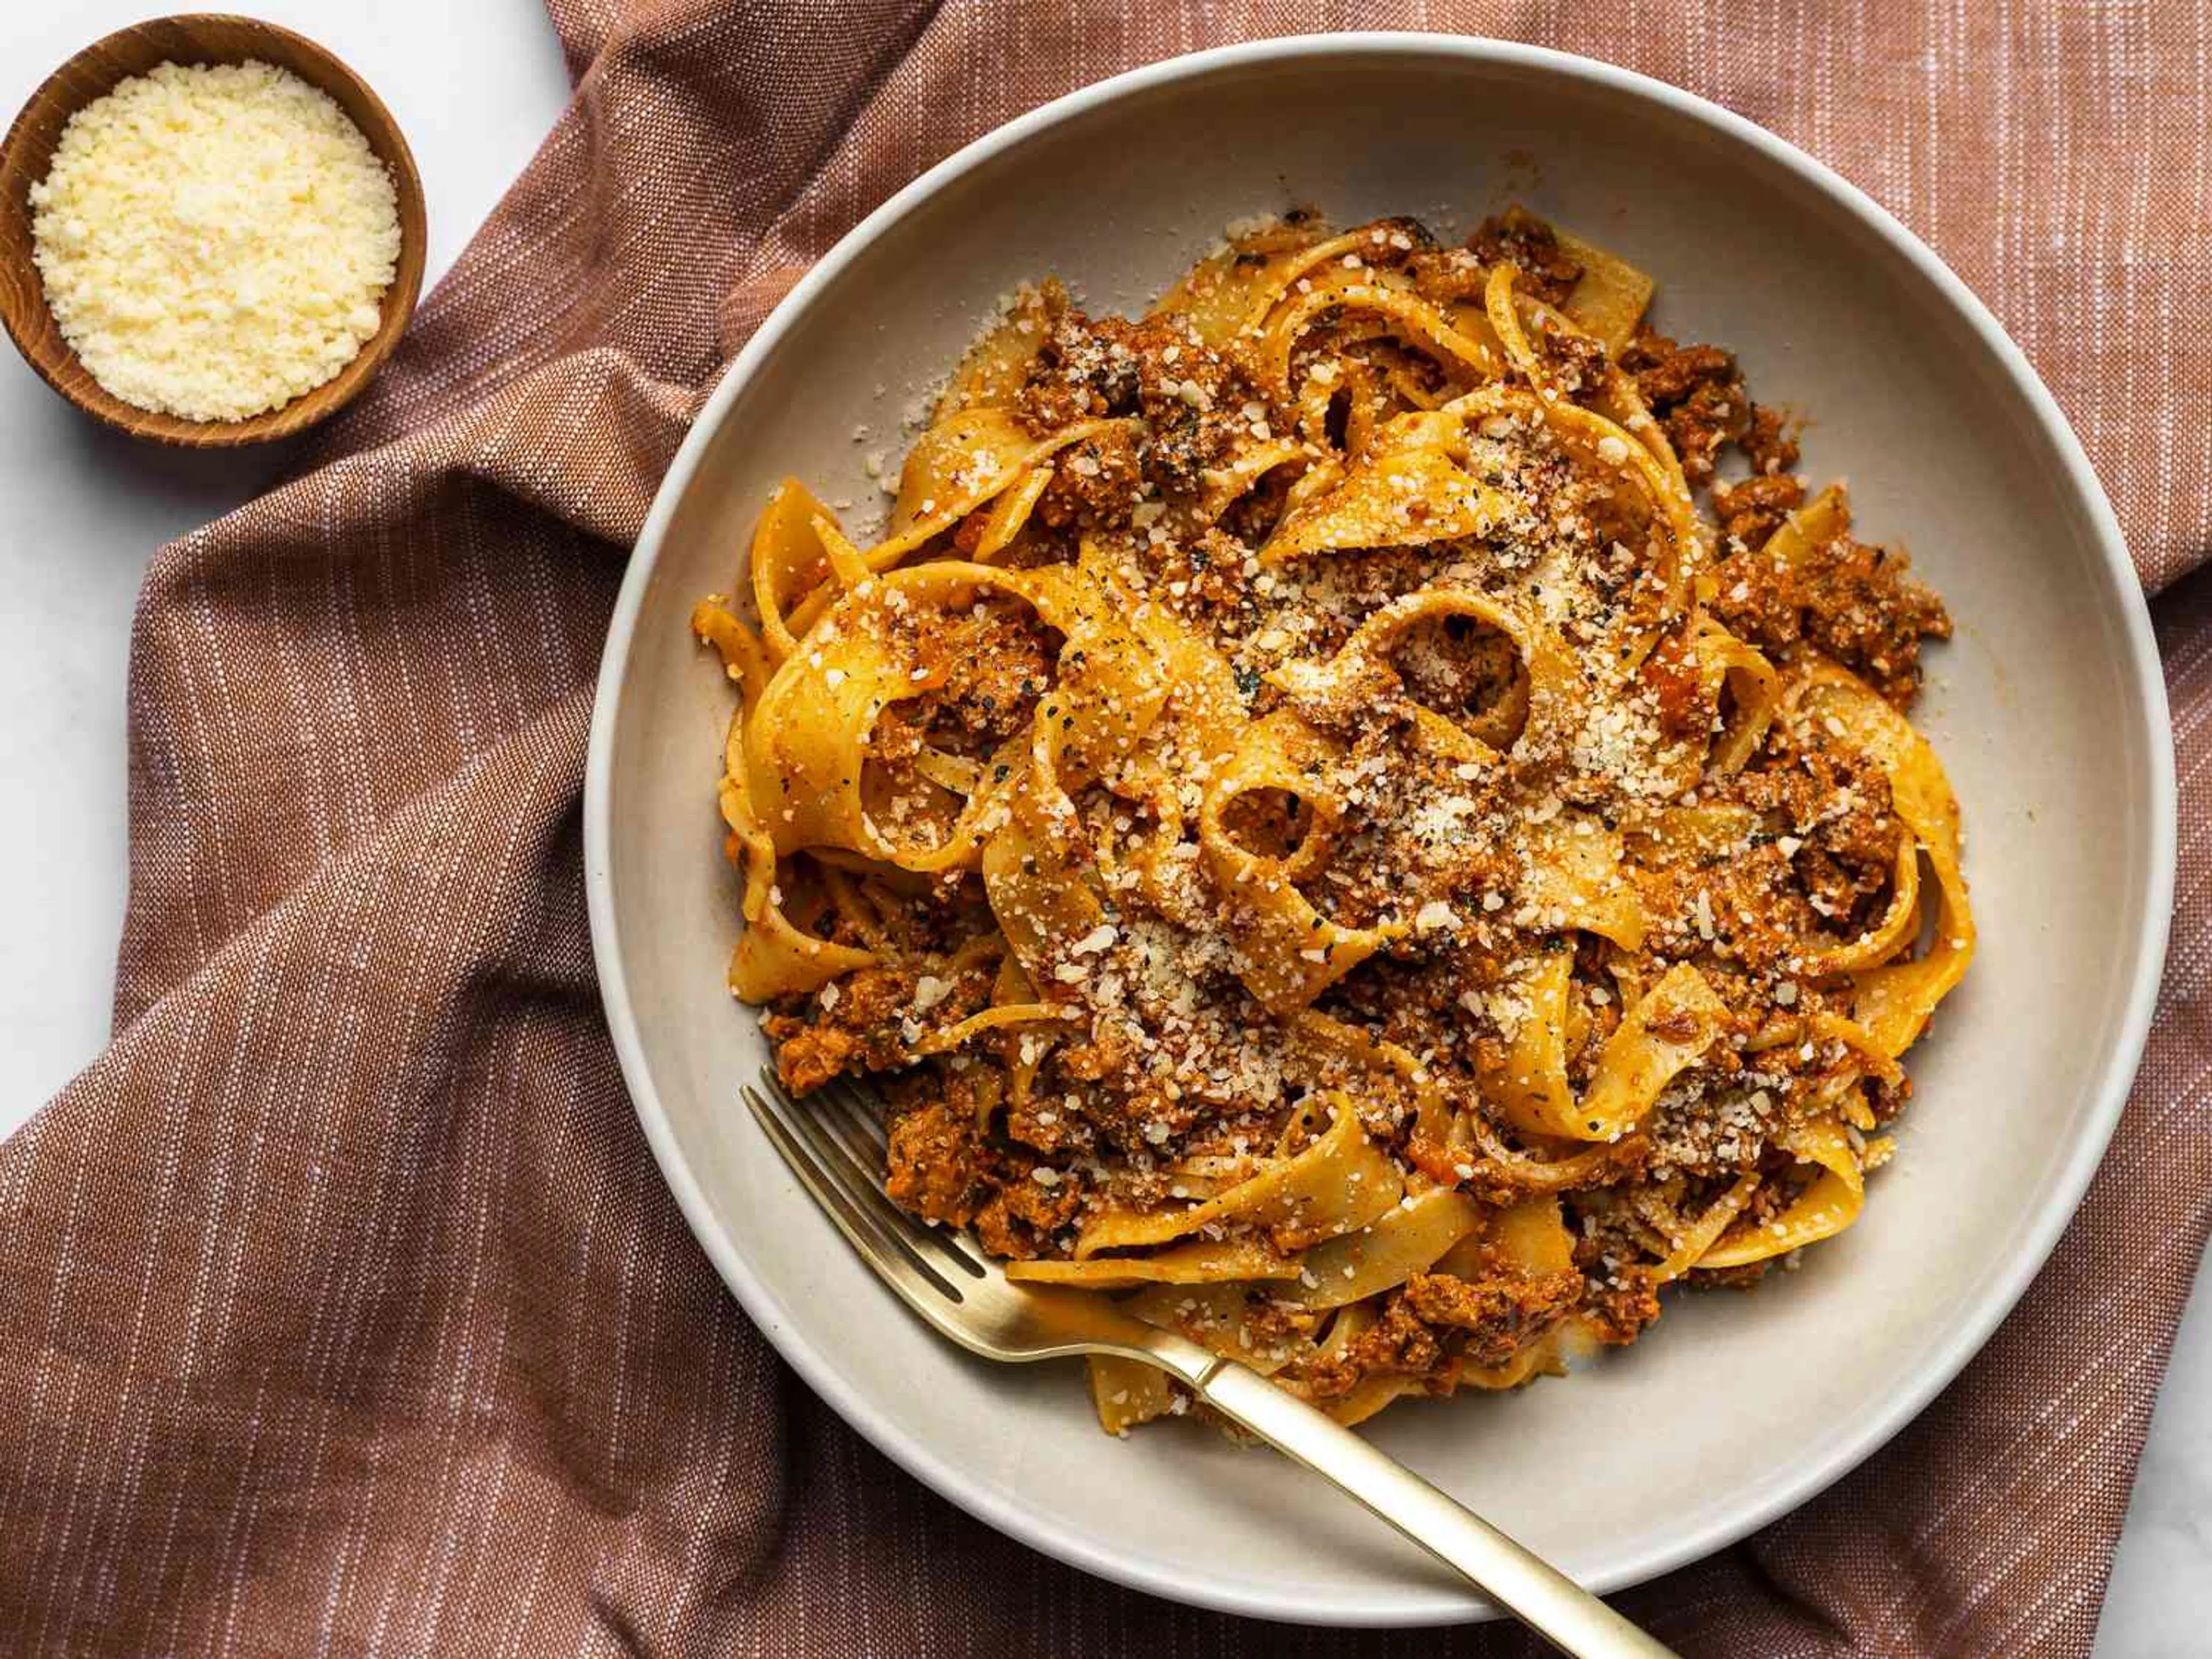 The Best Slow-Cooked Bolognese Sauce Recipe